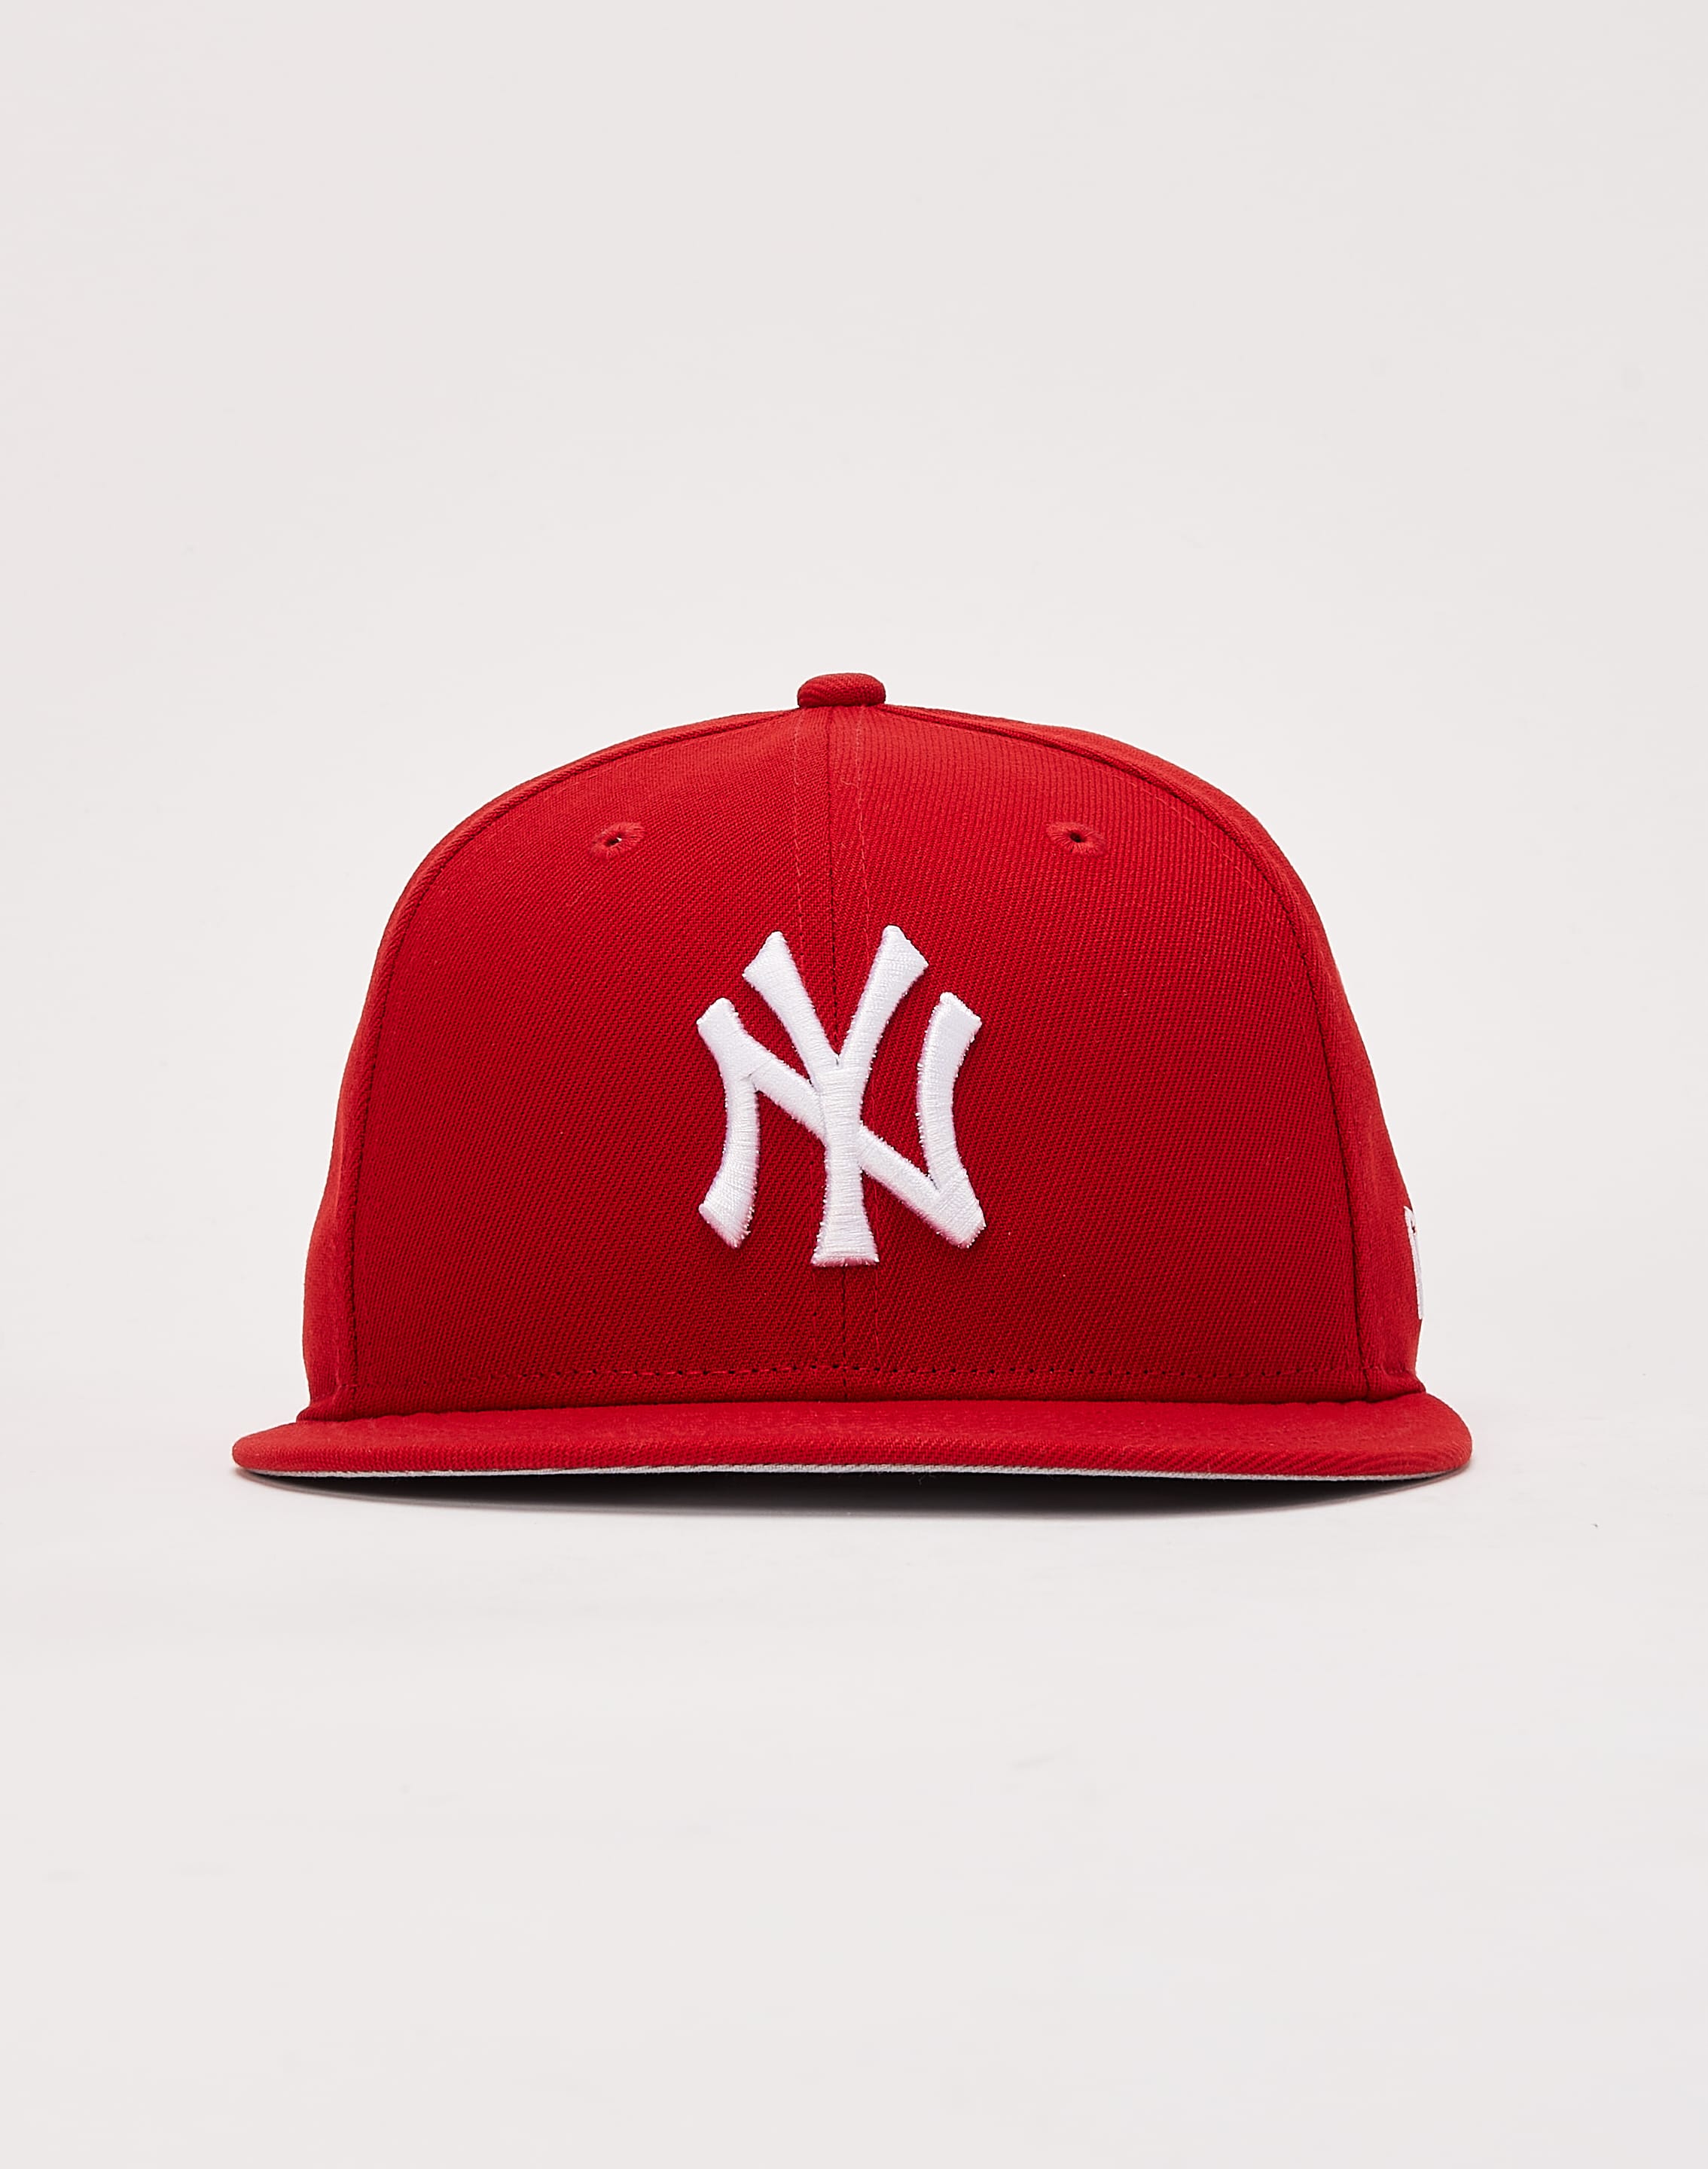 New Era Gorra New York Yankees Classic Red MLB 9Fifty Ajustable Unisex :  .com.mx: Deportes y Aire Libre